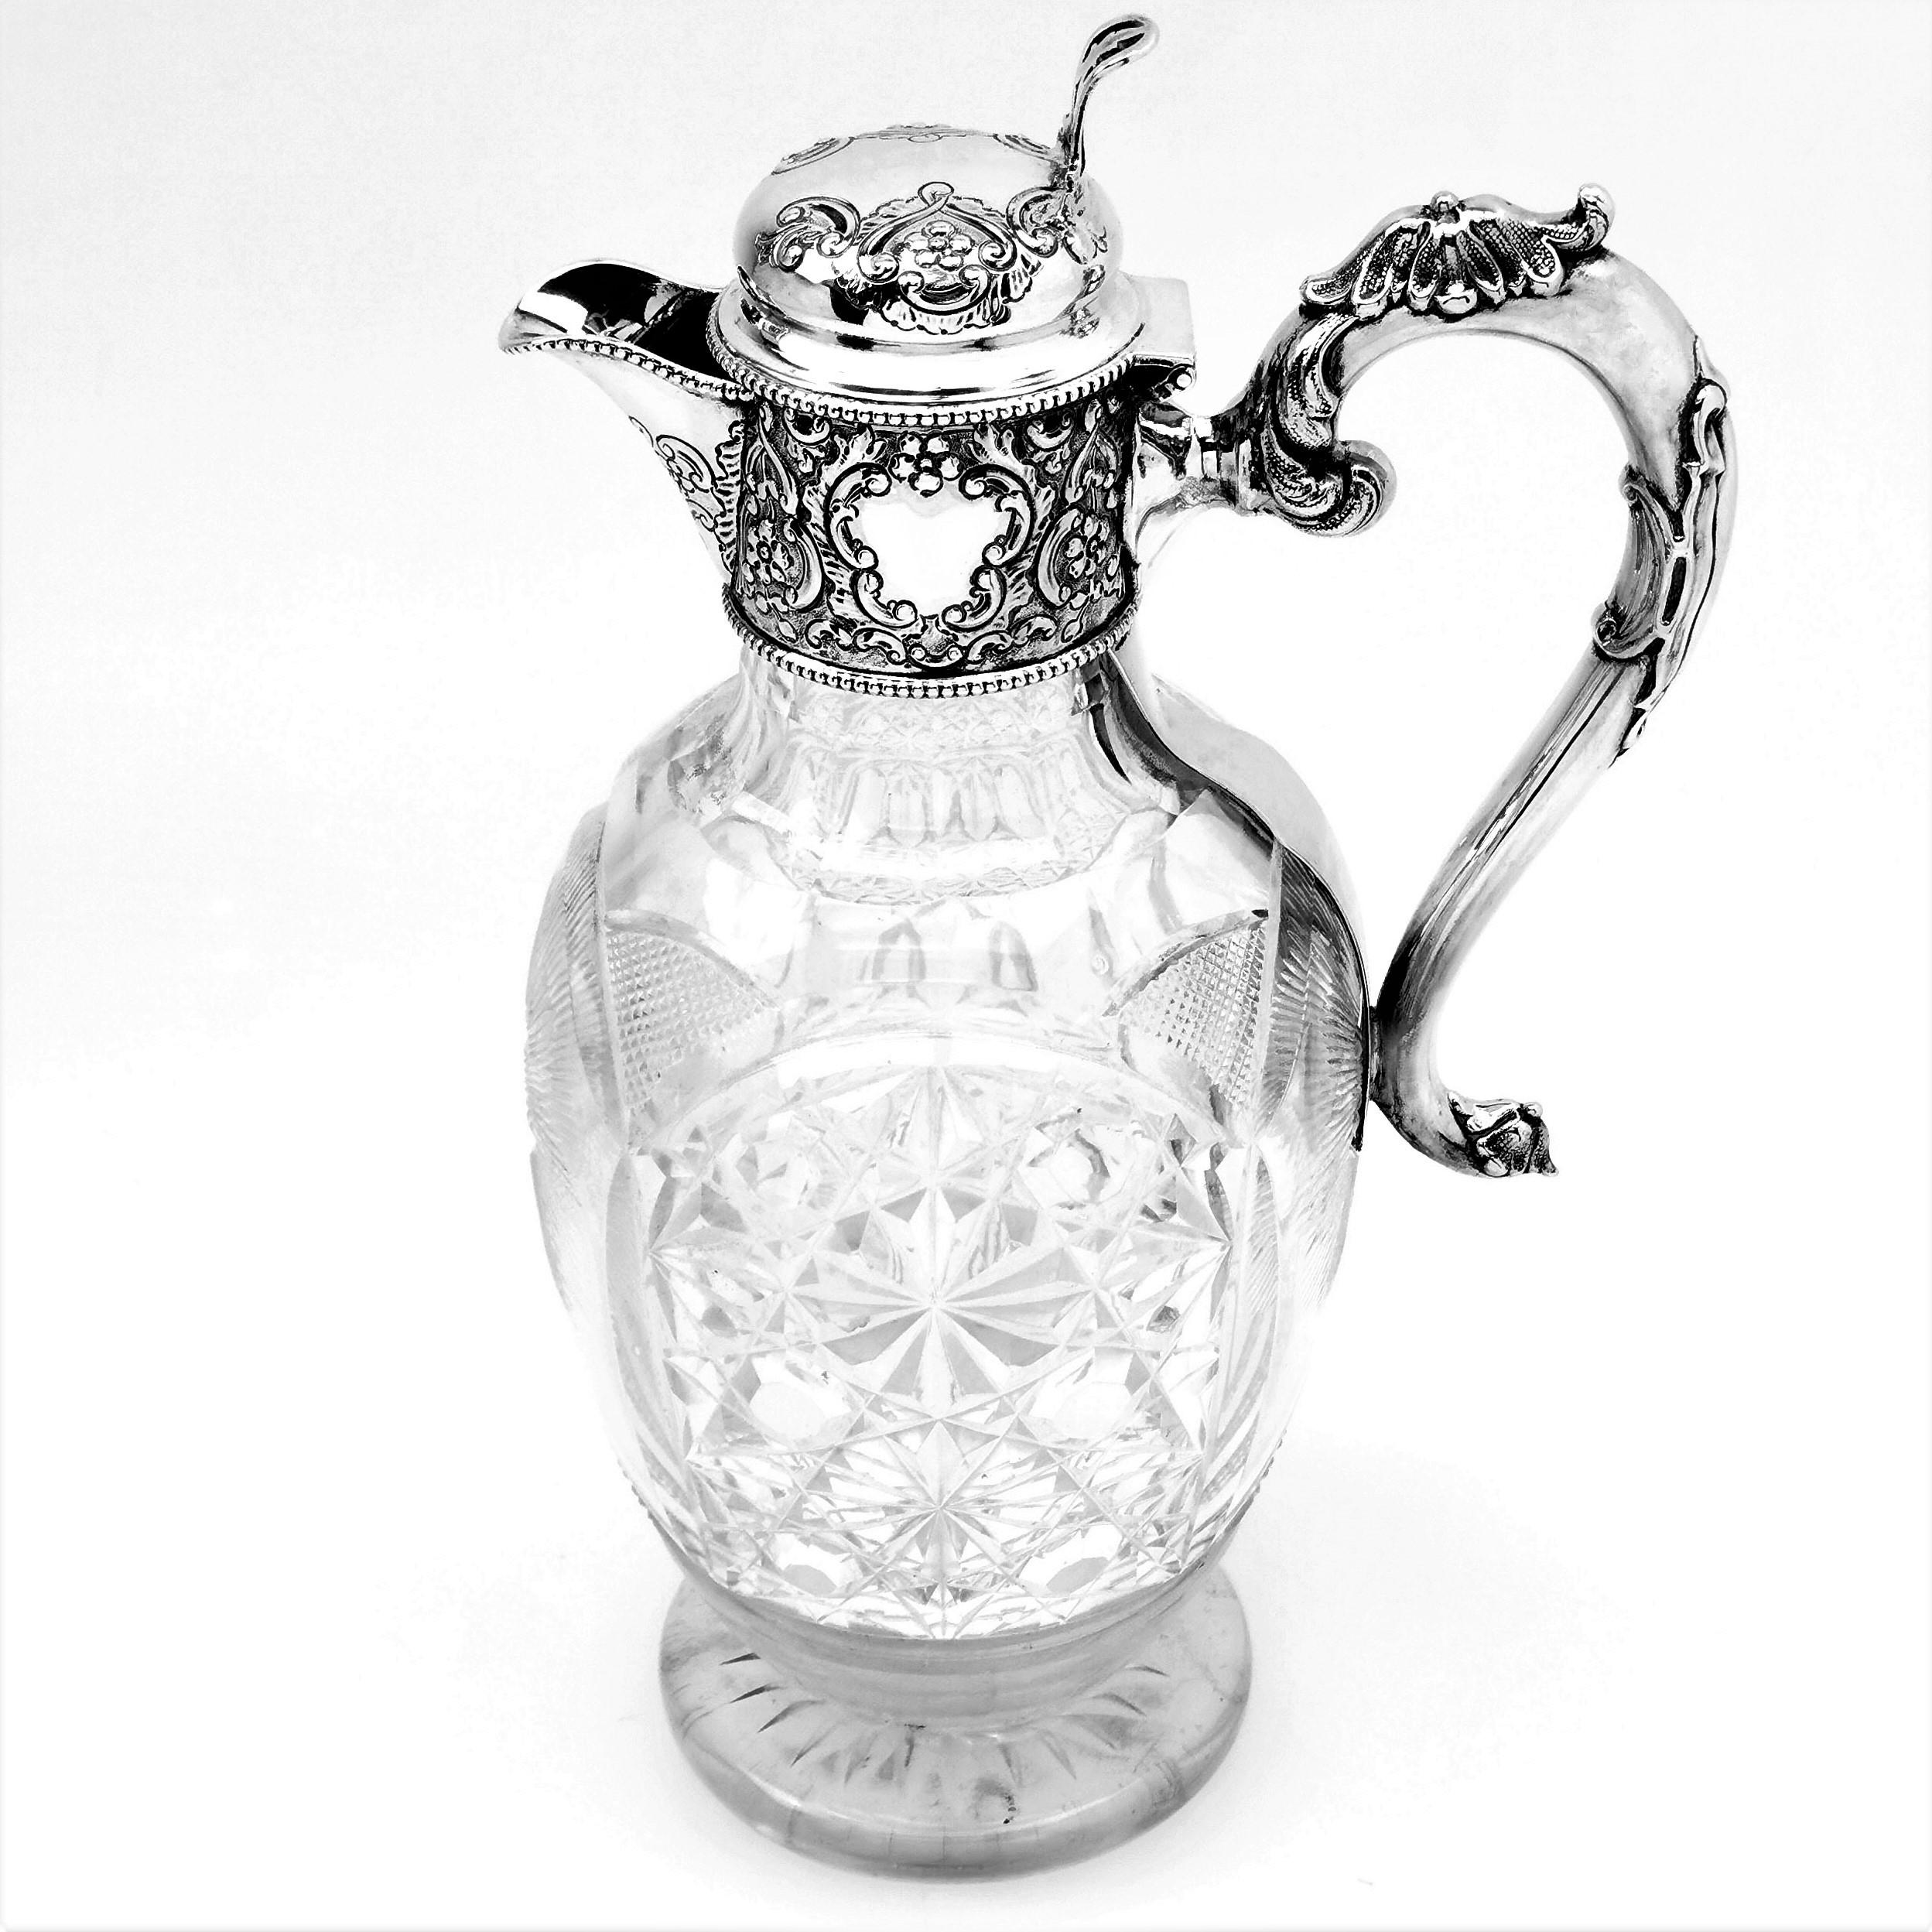 A lovely antique sterling silver and cut glass claret jug. The wine jug has an elegant cut glass body featuring a star burst pattern opposite the handle. The claret jug has a solid silver collar, handle and hinged lid. The claret Jug features a